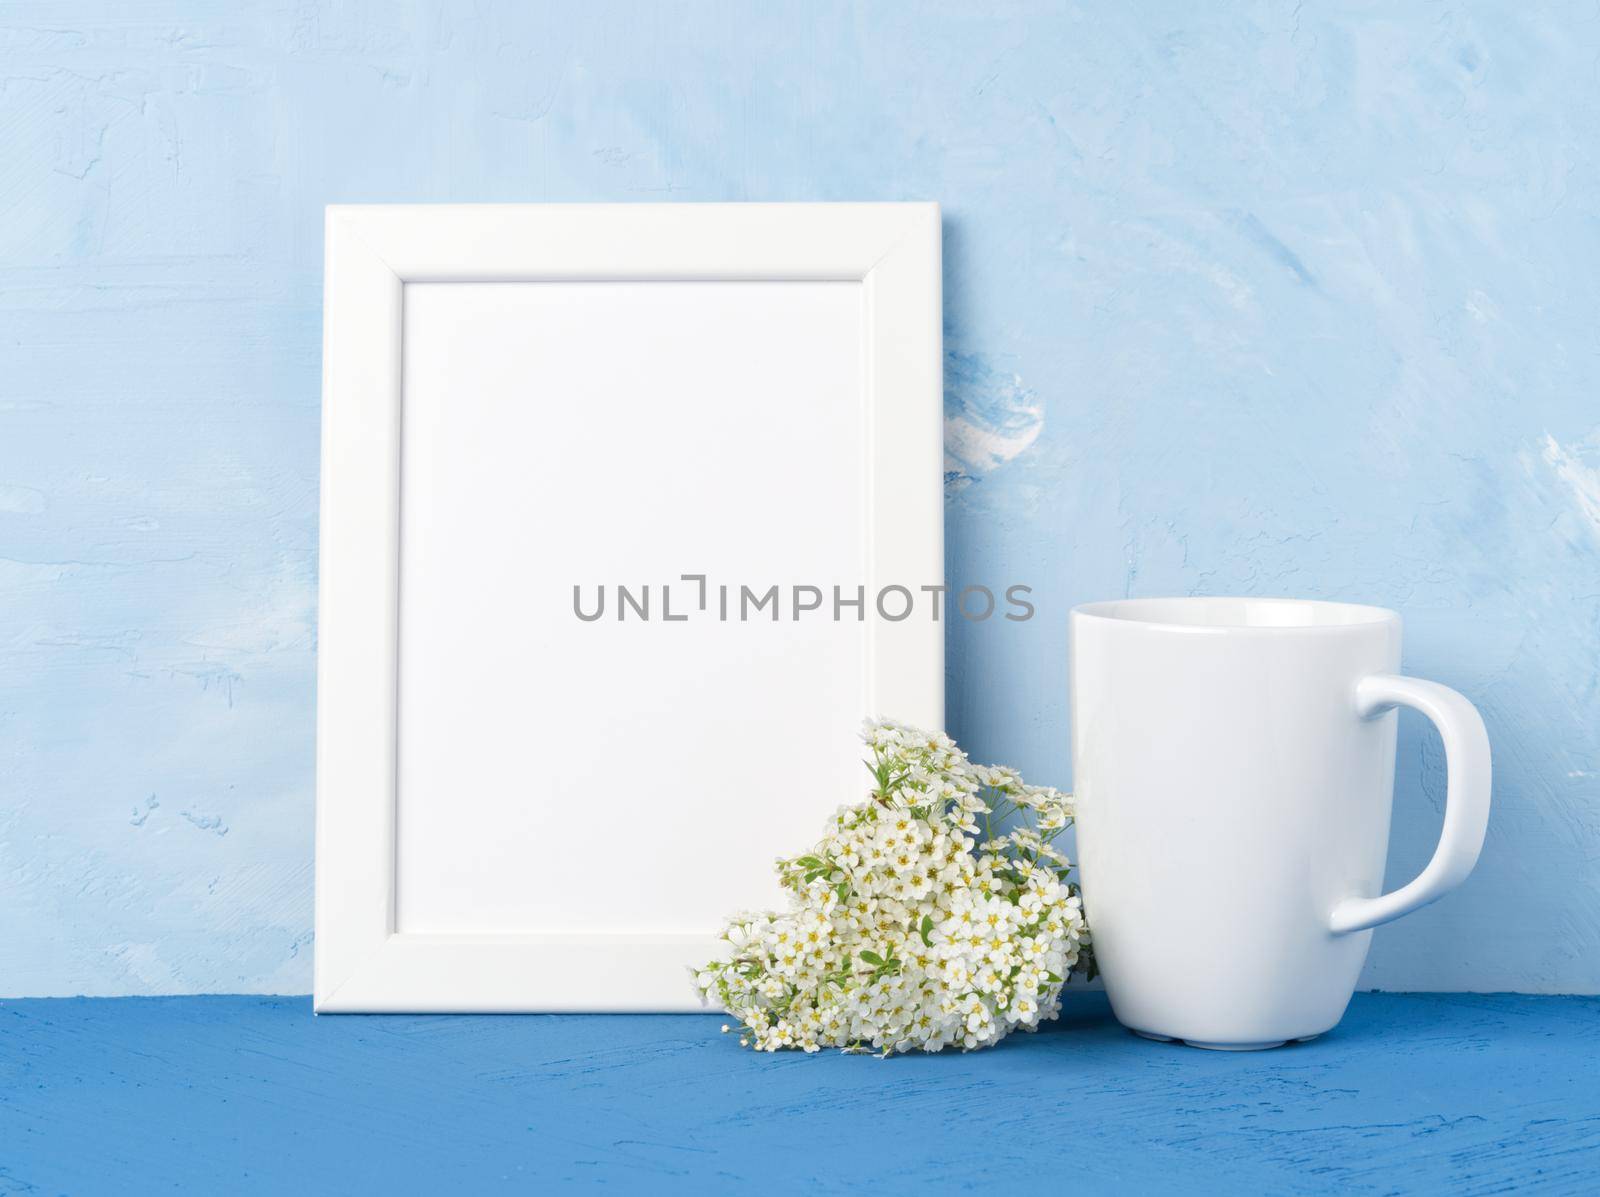 White mug with tea or coffee, frame, flower bouquet on blue table opposite blue concrete wall. Mock up with empty space by NataBene